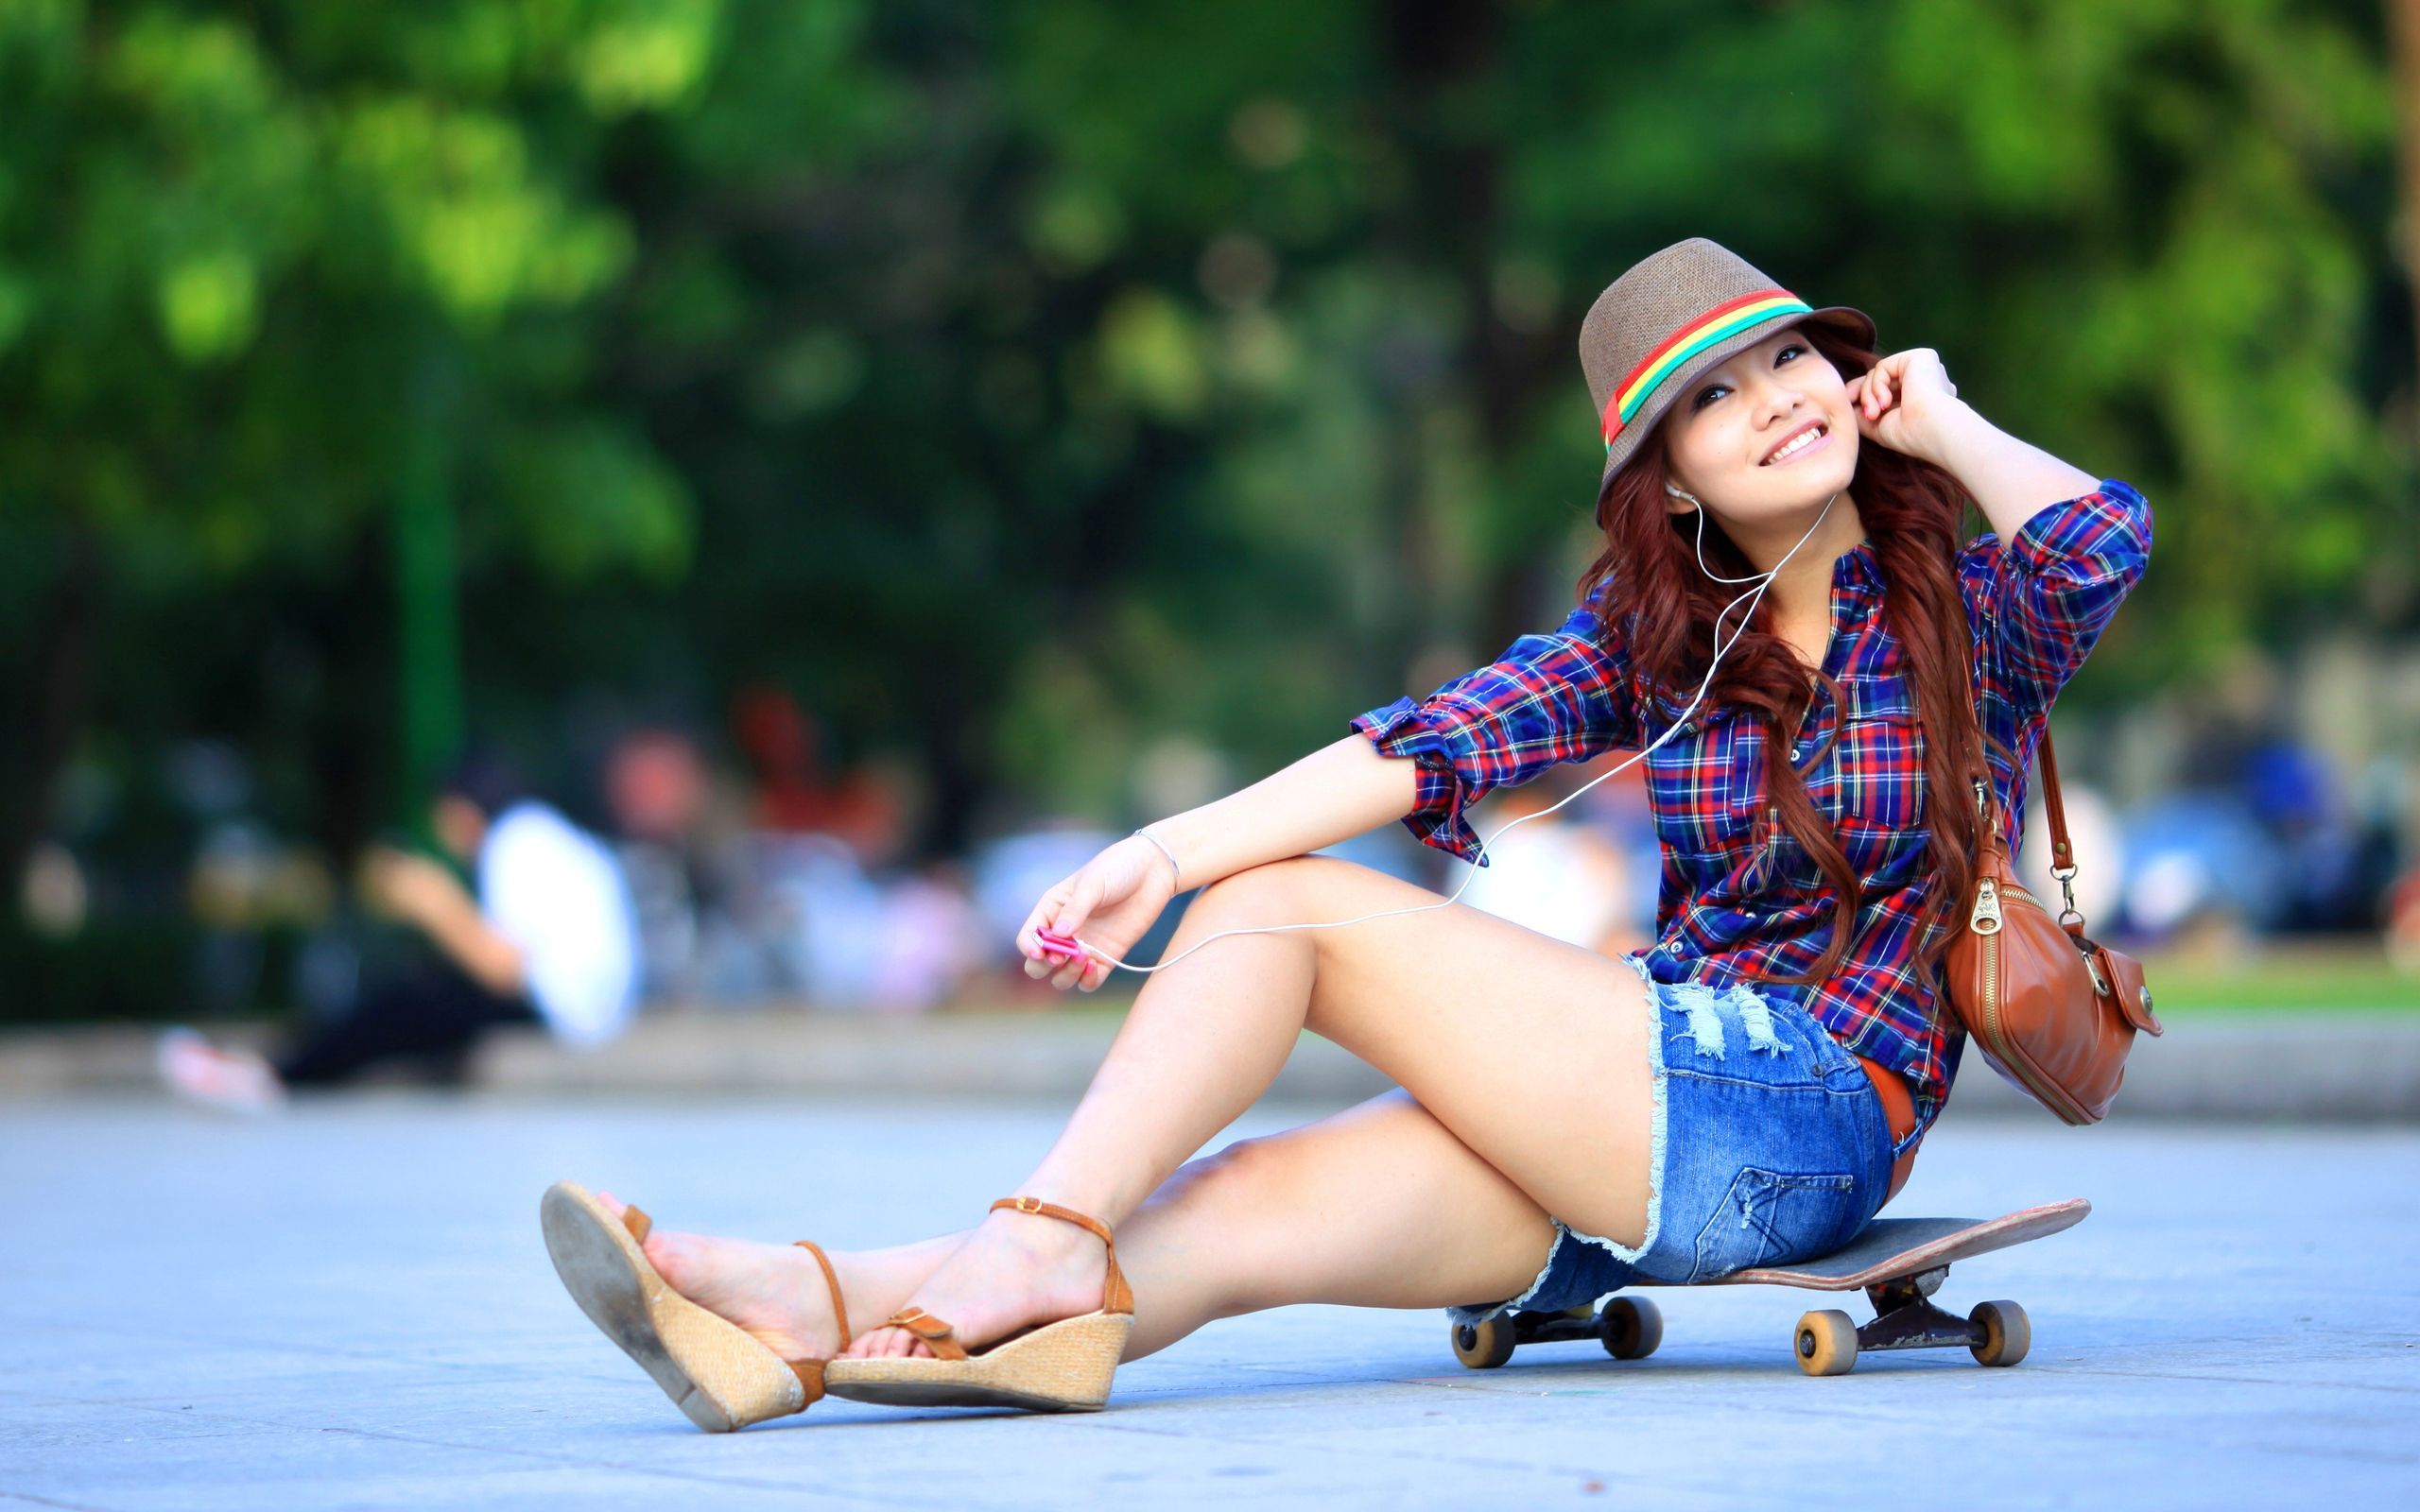 Skateboard Background Wallpapers | WIN10 THEMES